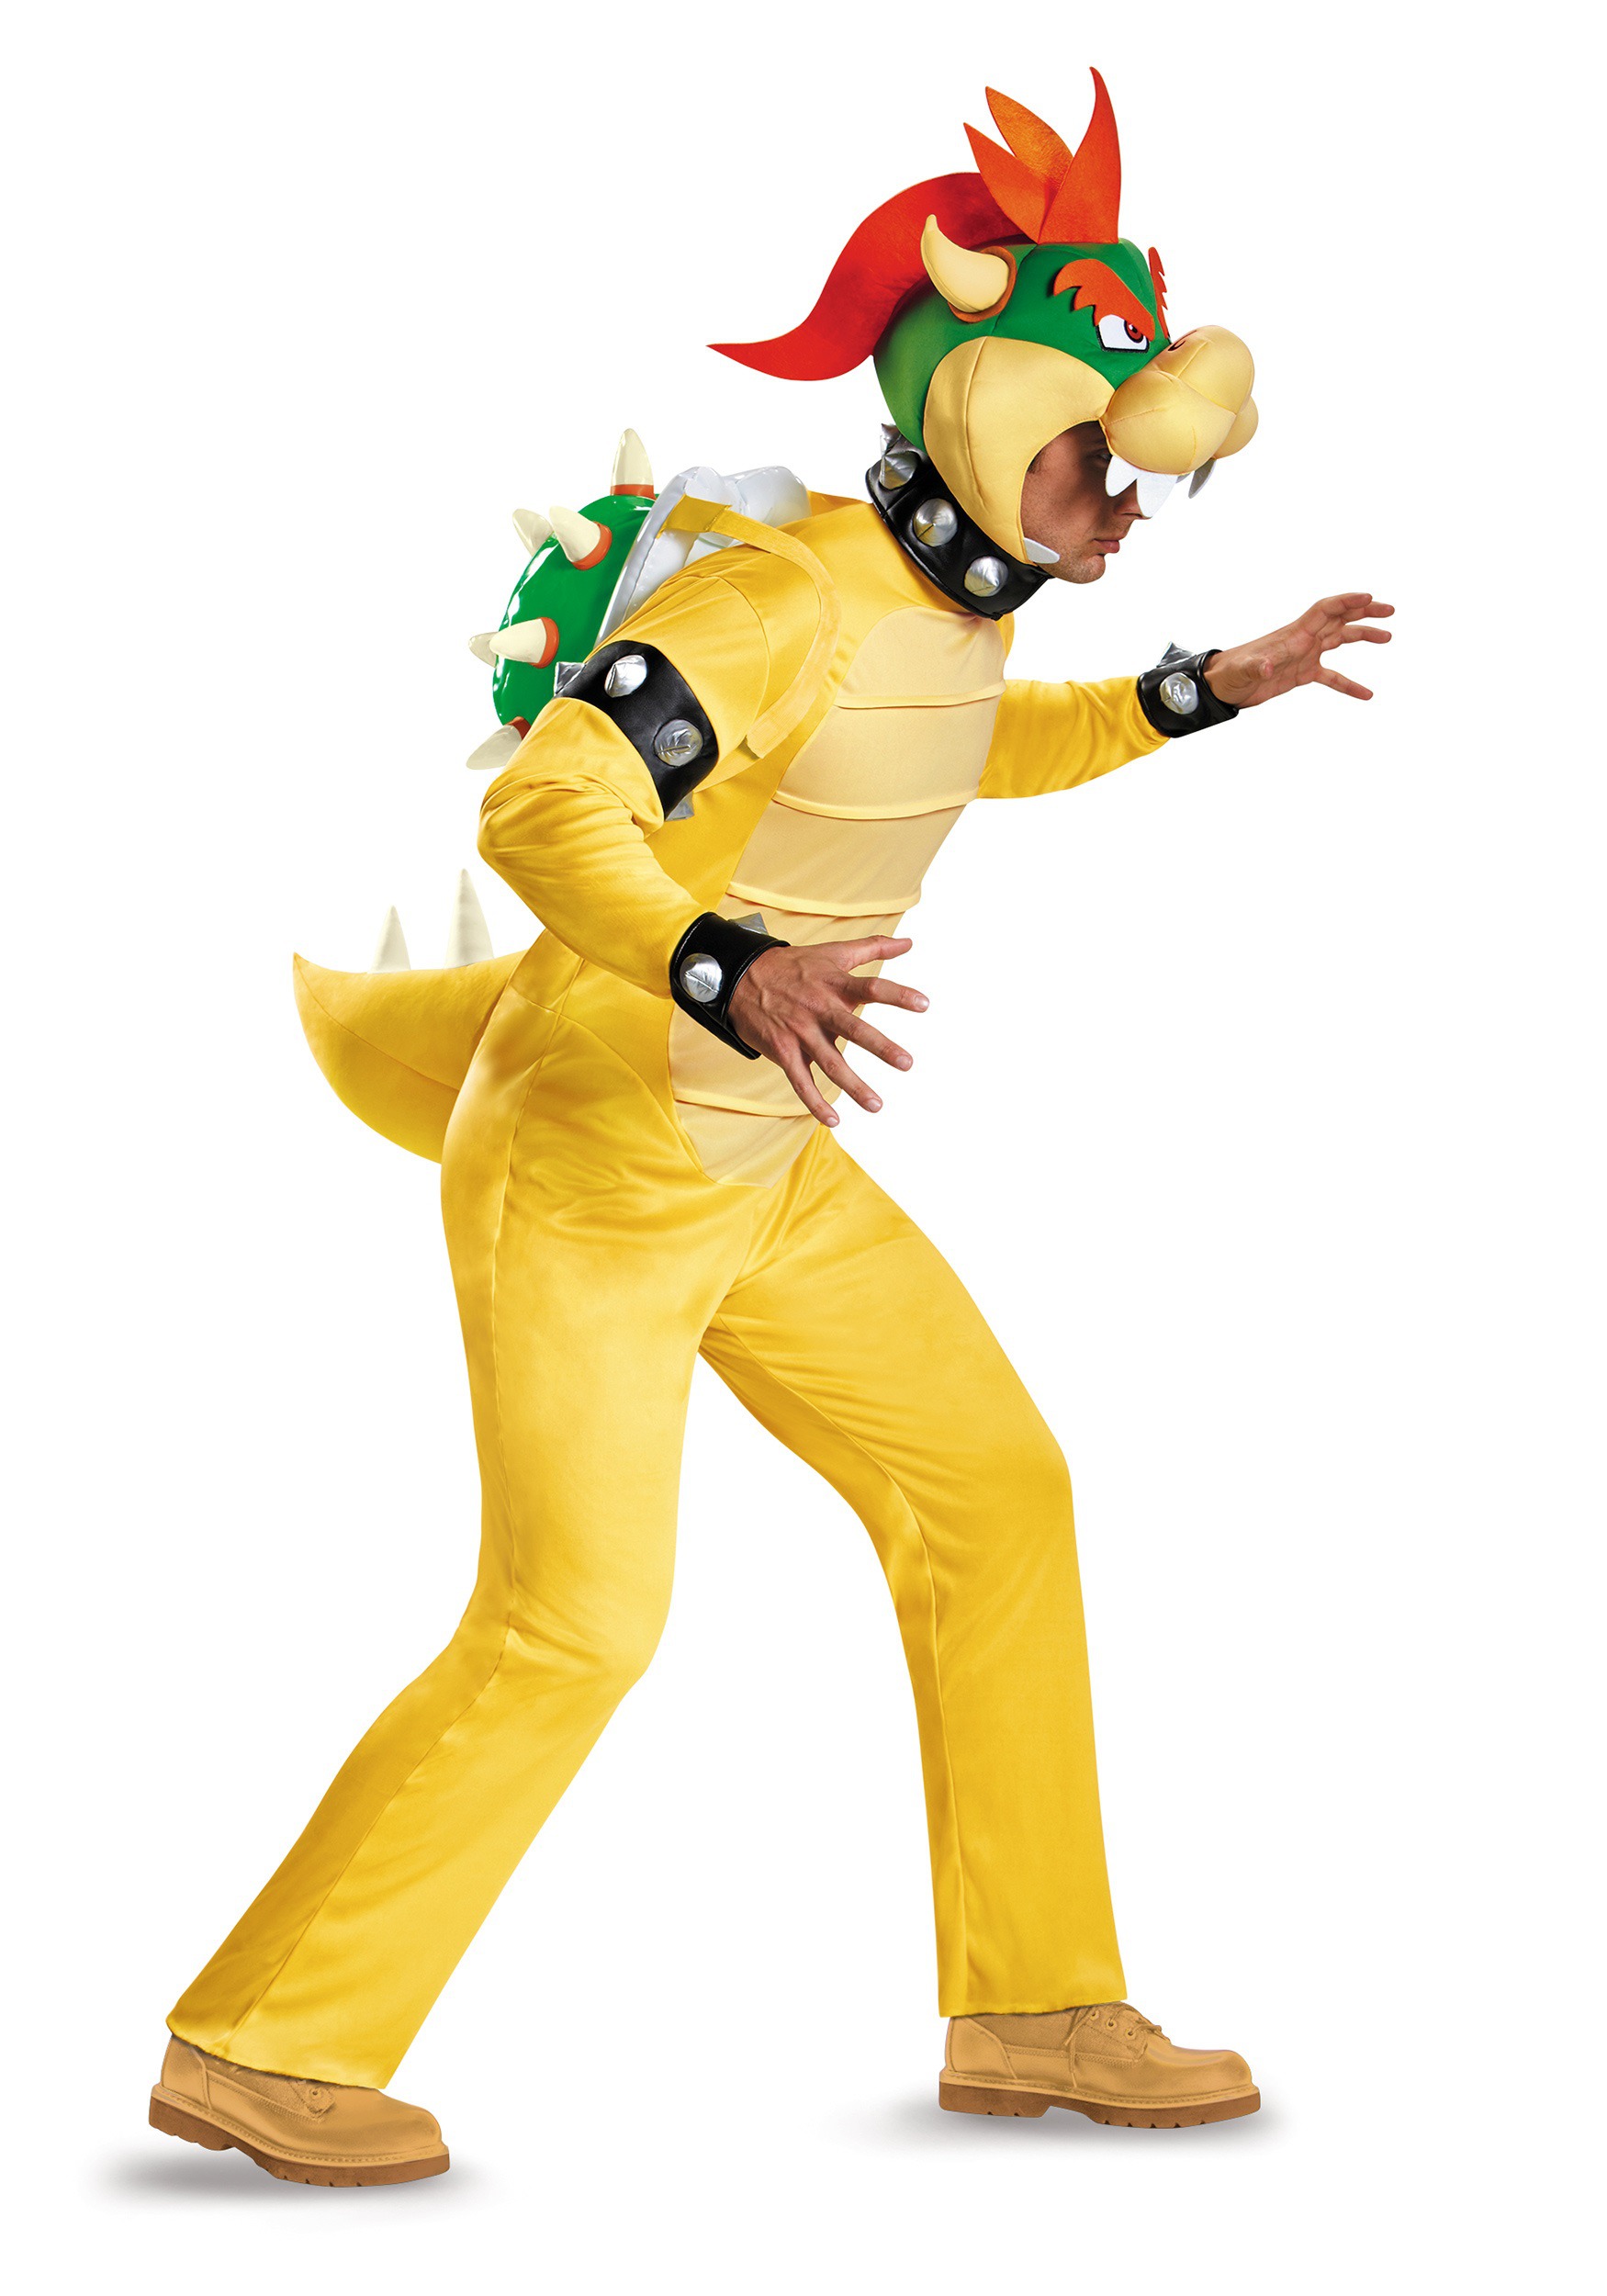 Image of Deluxe Adult Bowser Costume | Super Mario Bros Costume ID DI85174-XL